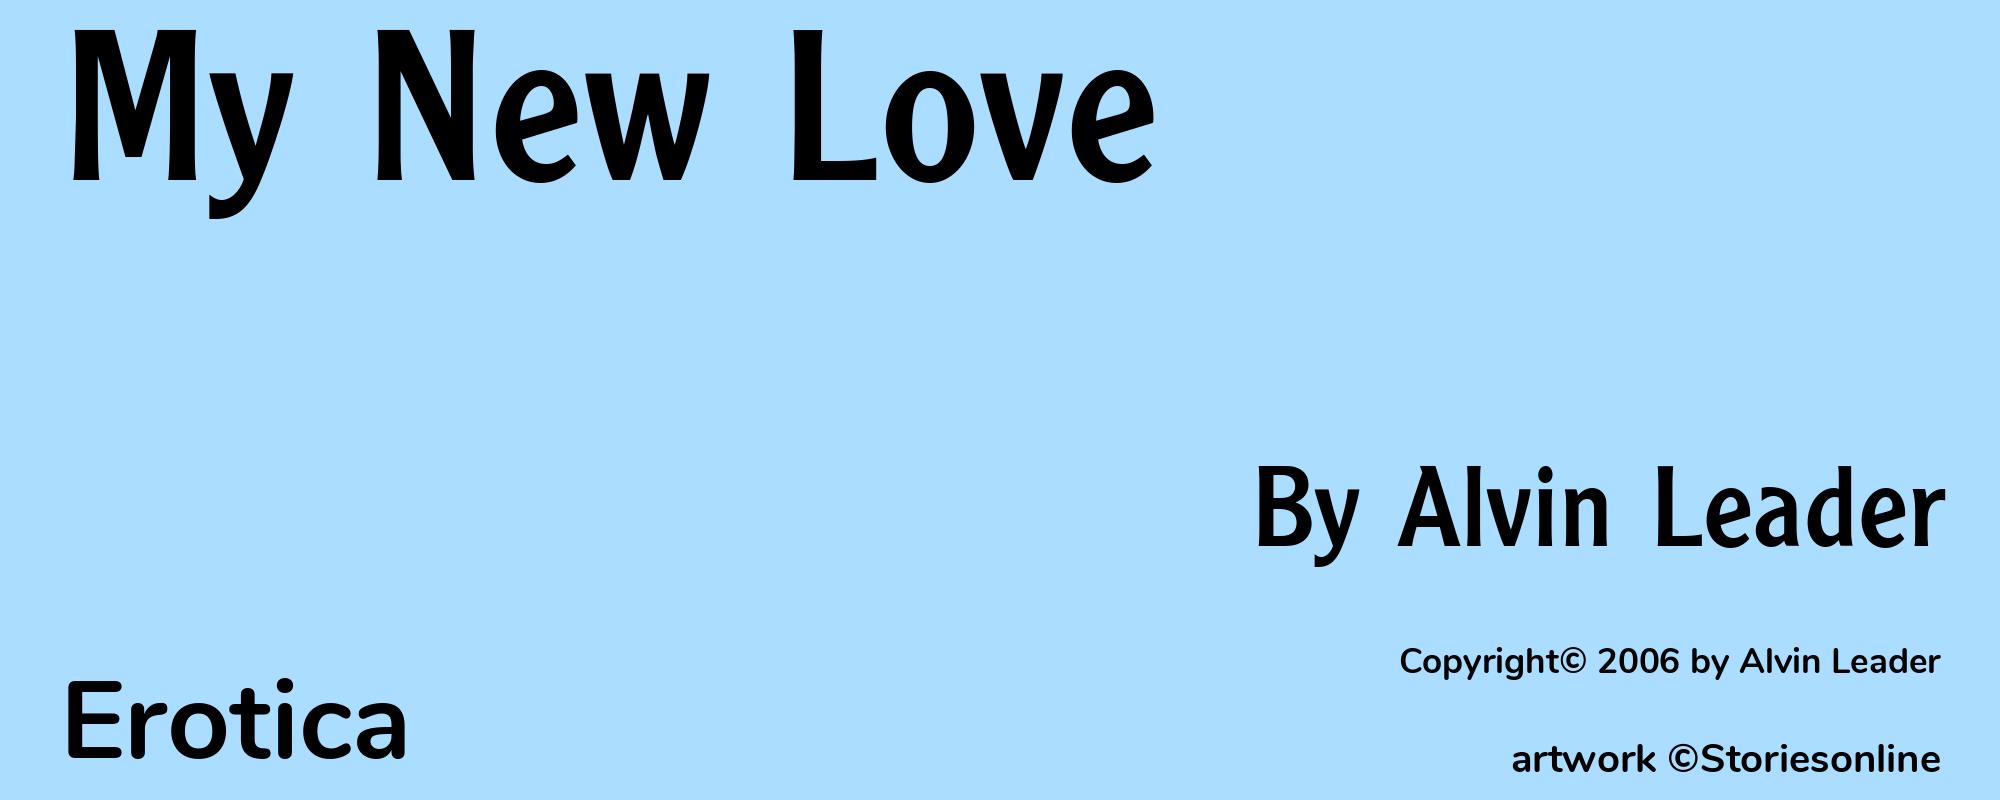 My New Love - Cover